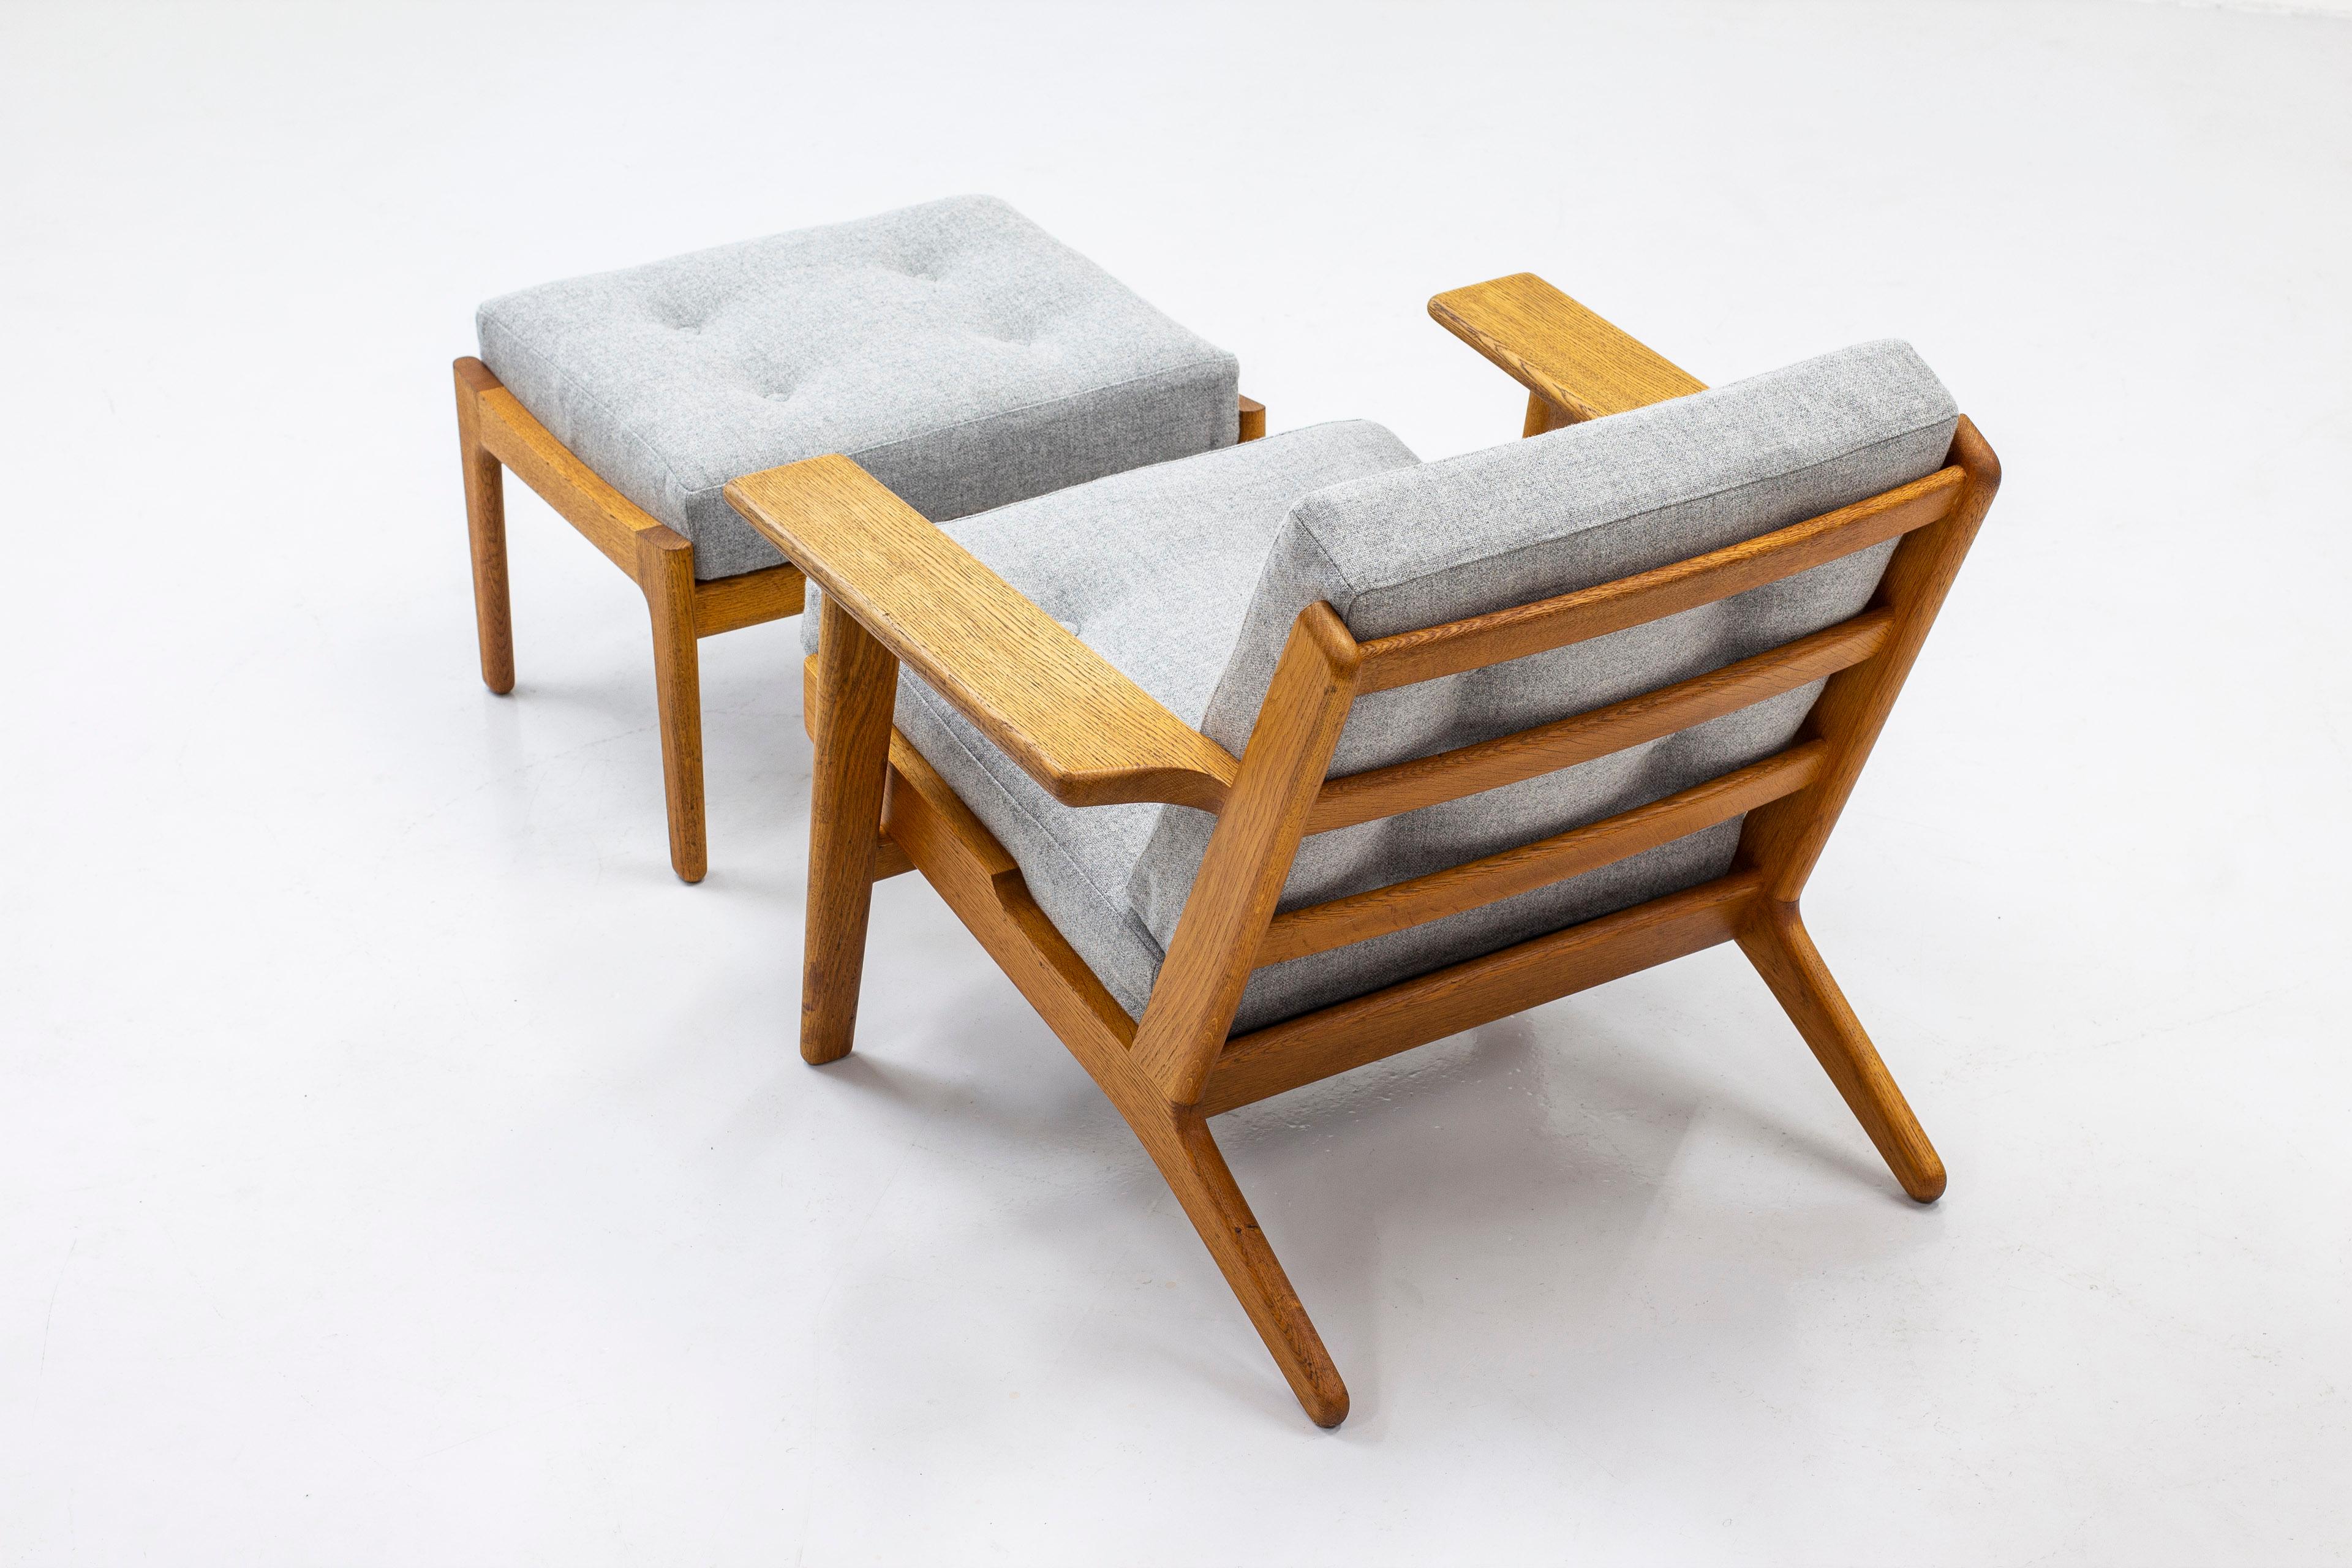 Lounge chair model GE-290 and ottoman designed by Hans J. Wegner. produced by GETAMA in Denmark in the 1960s. Made from solid oak. Cushions with new grey wool fabric from Kvadrat. Excellent vintage condition with very few signs of age and use. Both